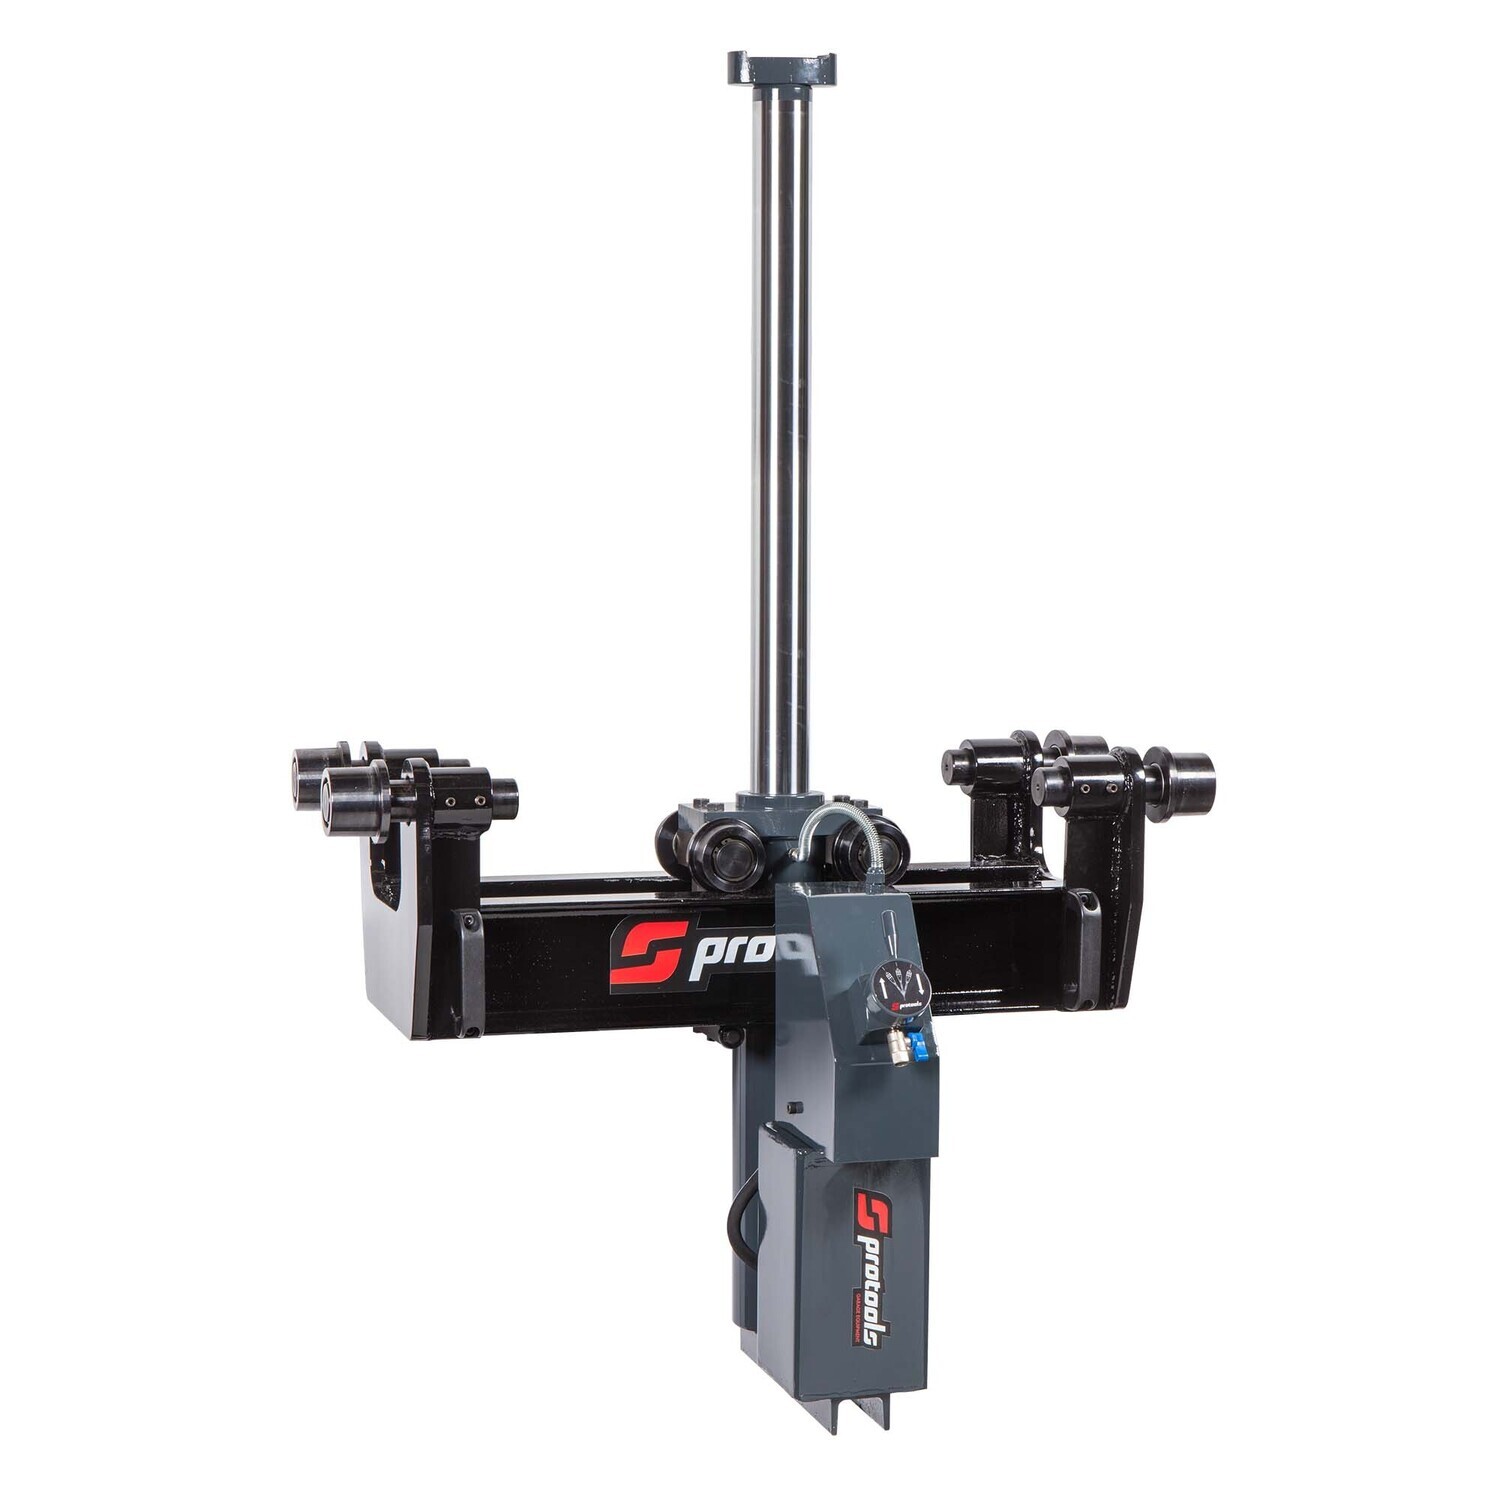 PJB020.975.1 Suspended air-hydraulic pit jack - Capacity 20t